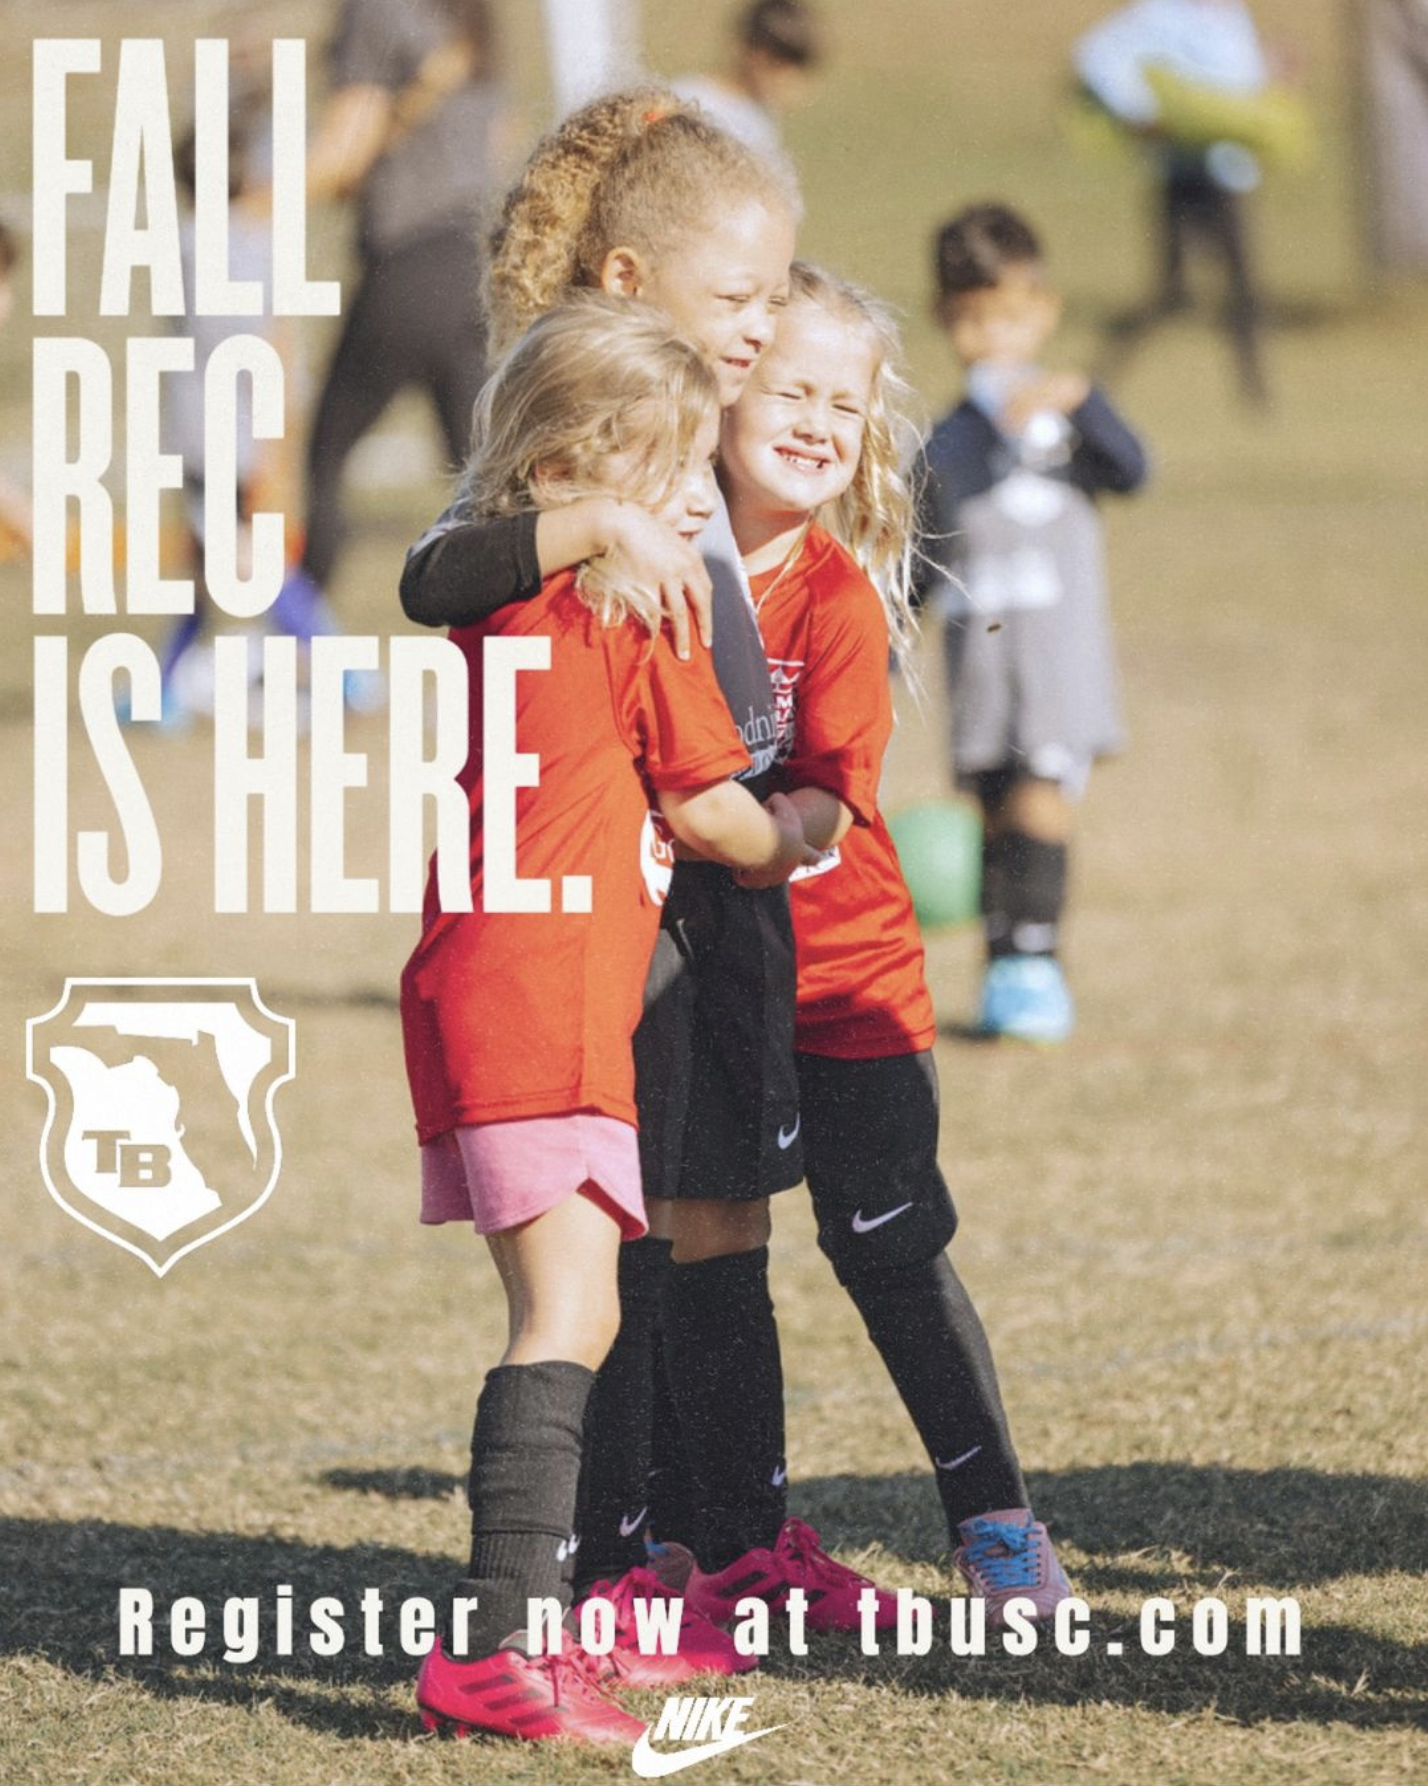 FALL REC IS HERE!